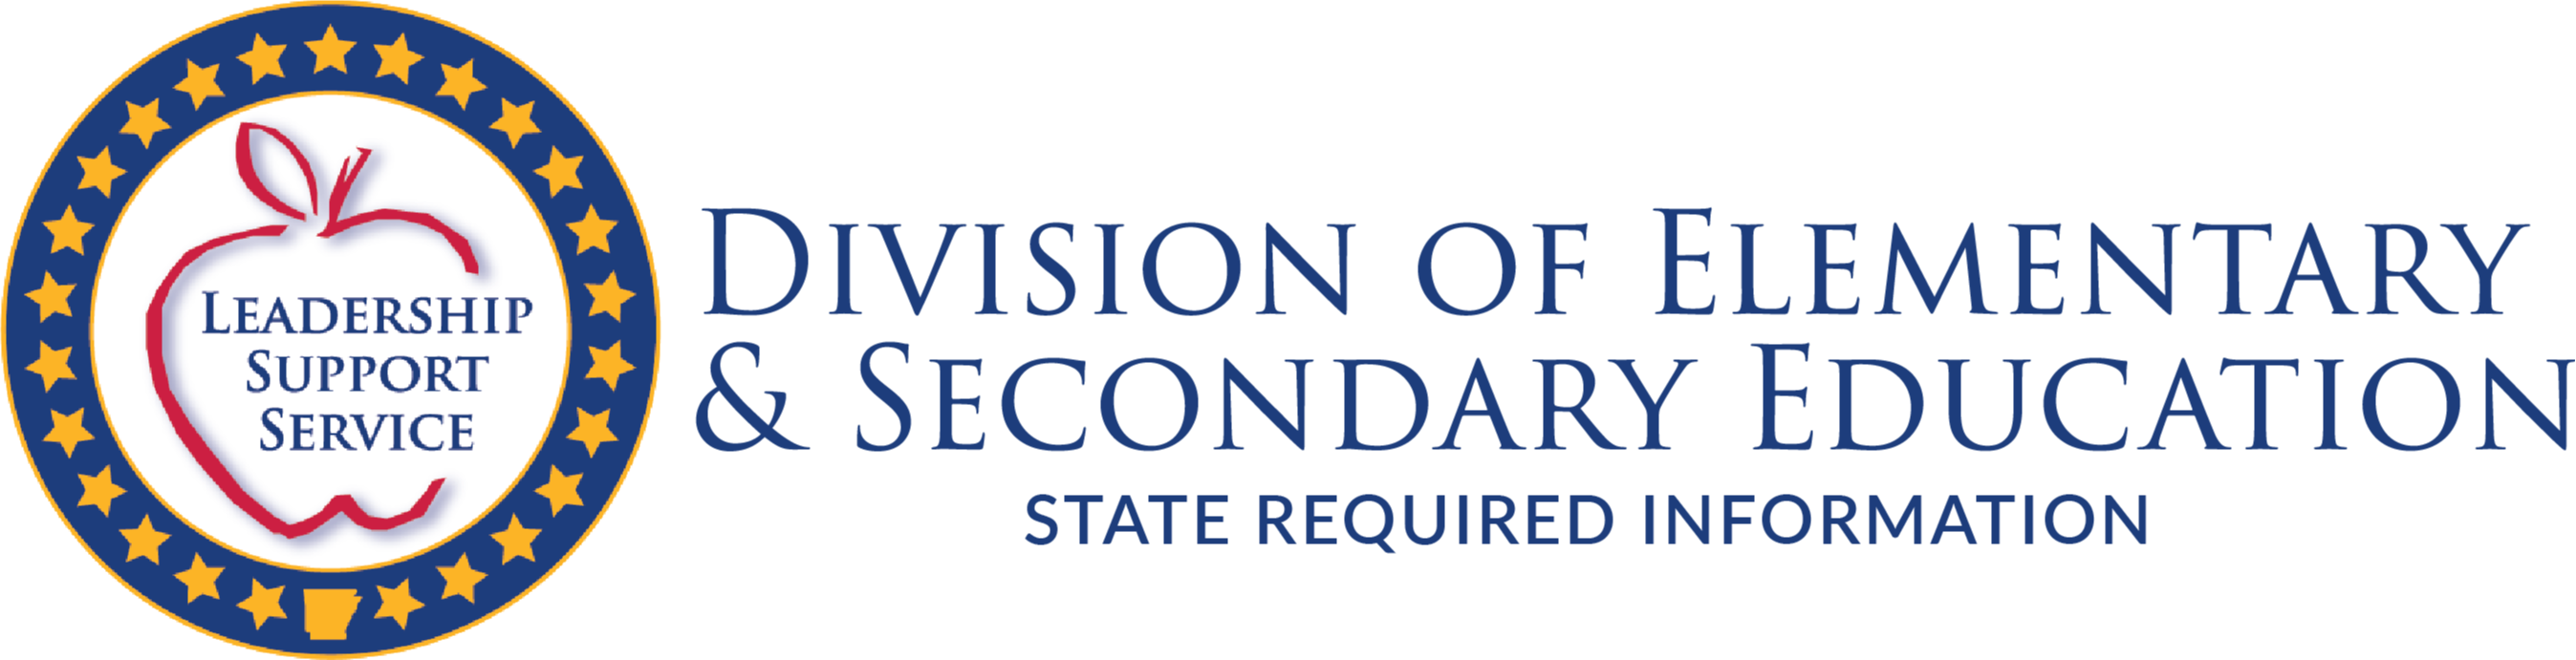 state required information